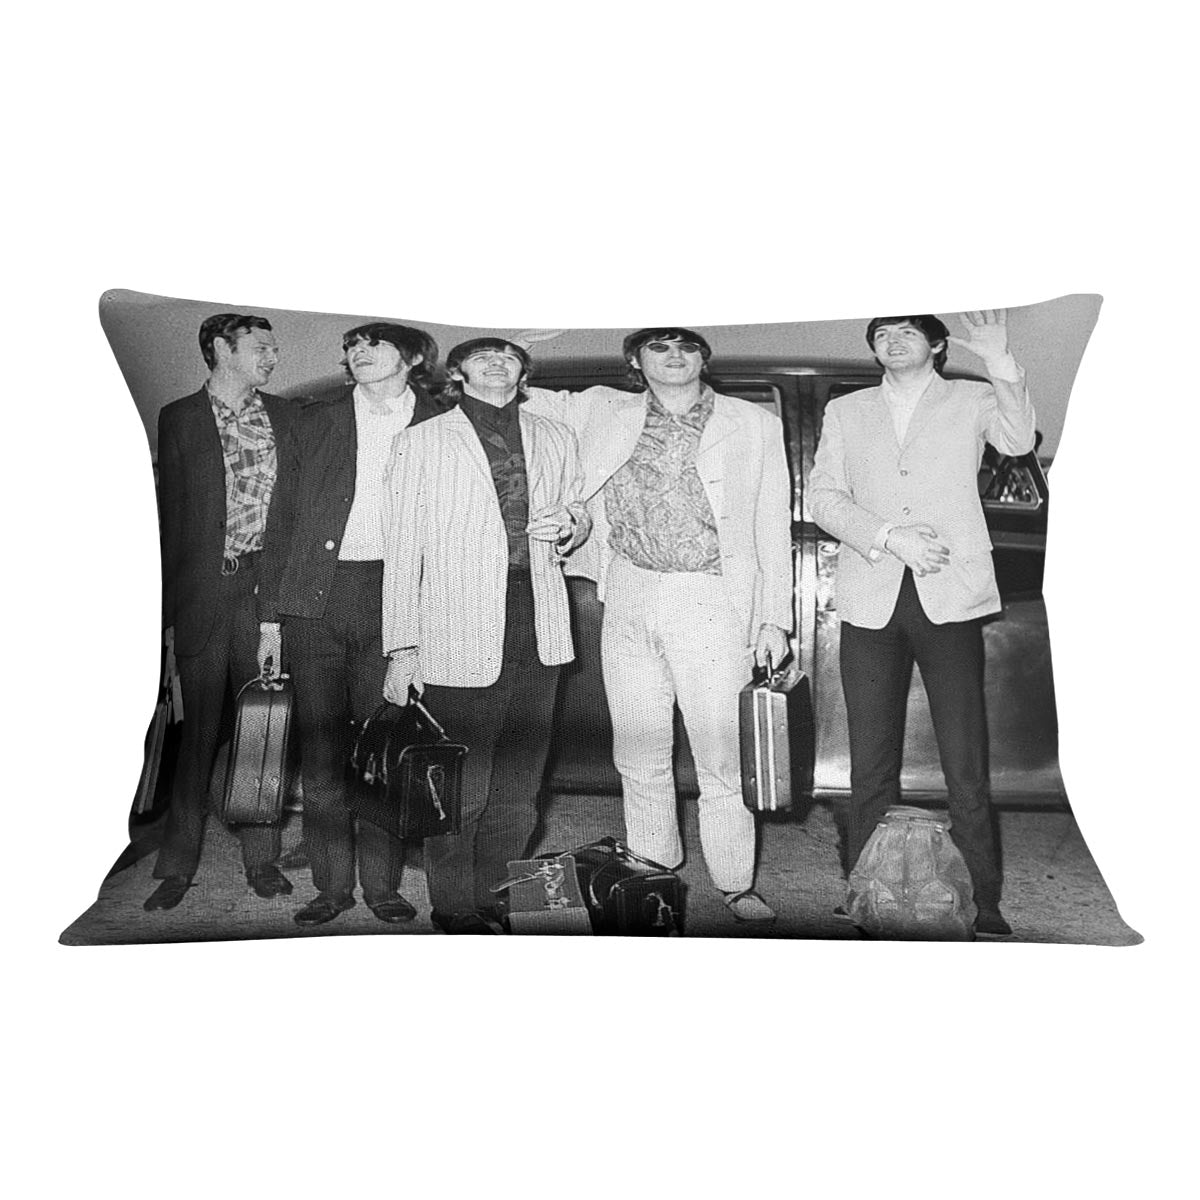 The Beatles and Brian Epstein at London Airport Cushion